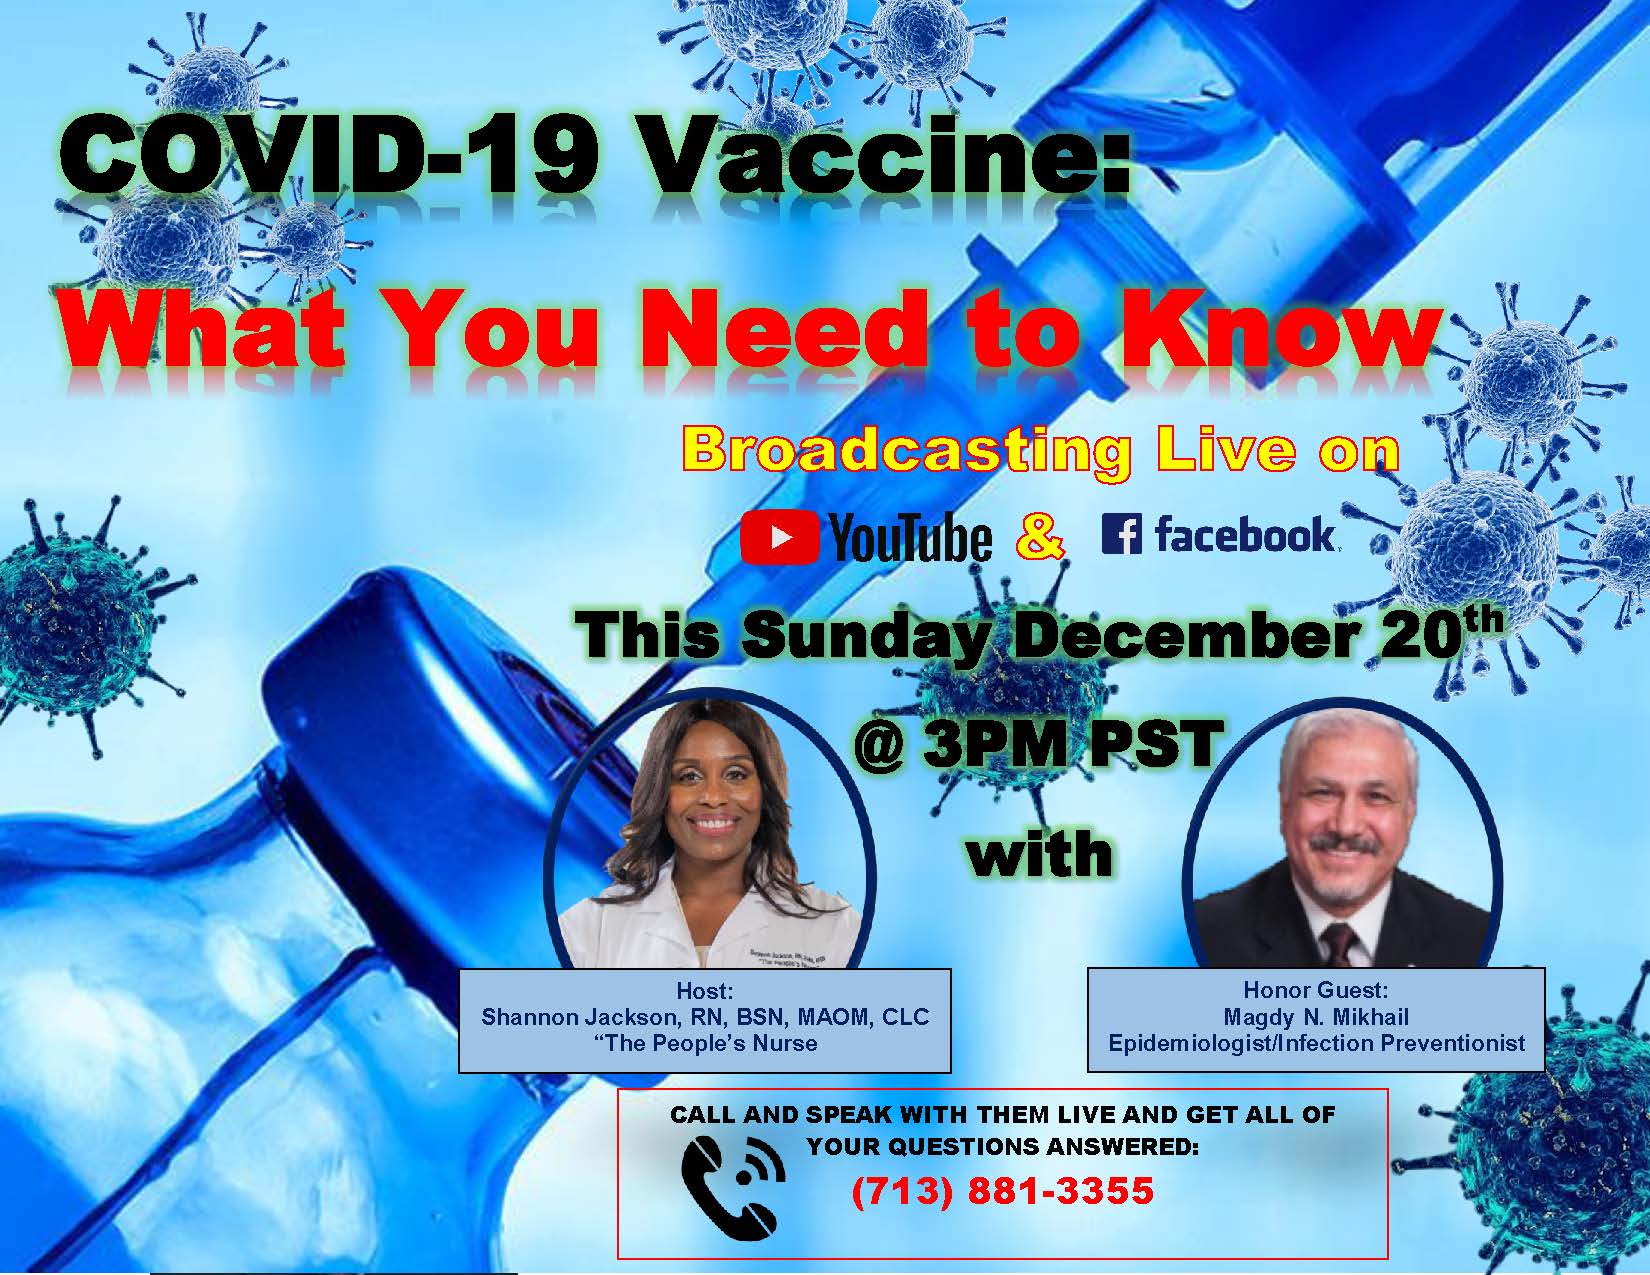 Living Your Life Without Limits - COVID-19 Vaccine, Los Angeles, California, United States